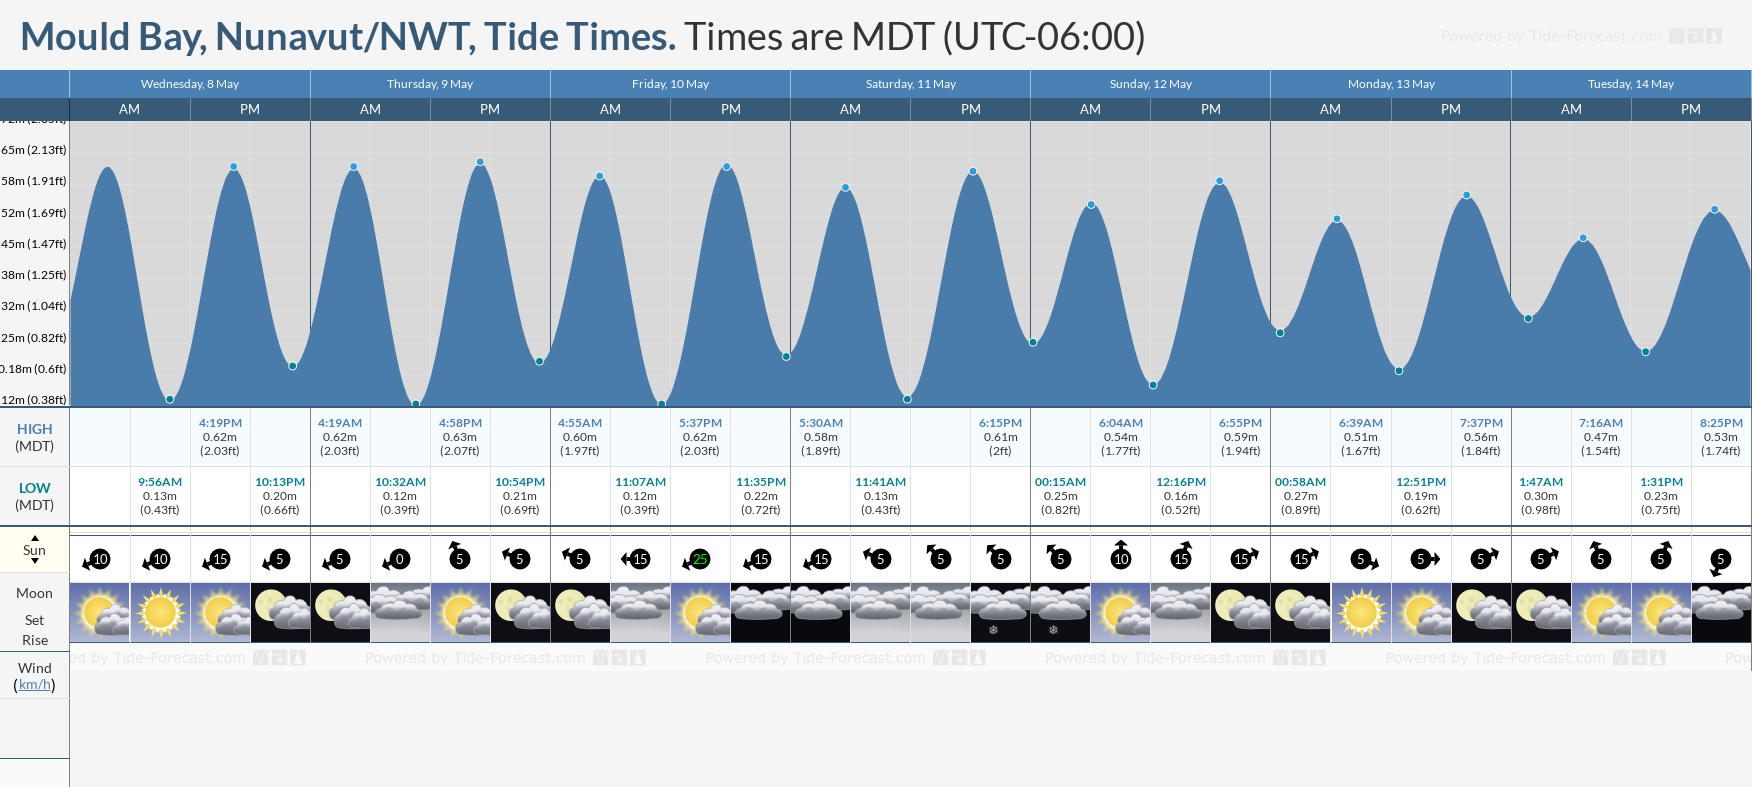 Mould Bay, Nunavut/NWT Tide Chart including high and low tide tide times for the next 7 days